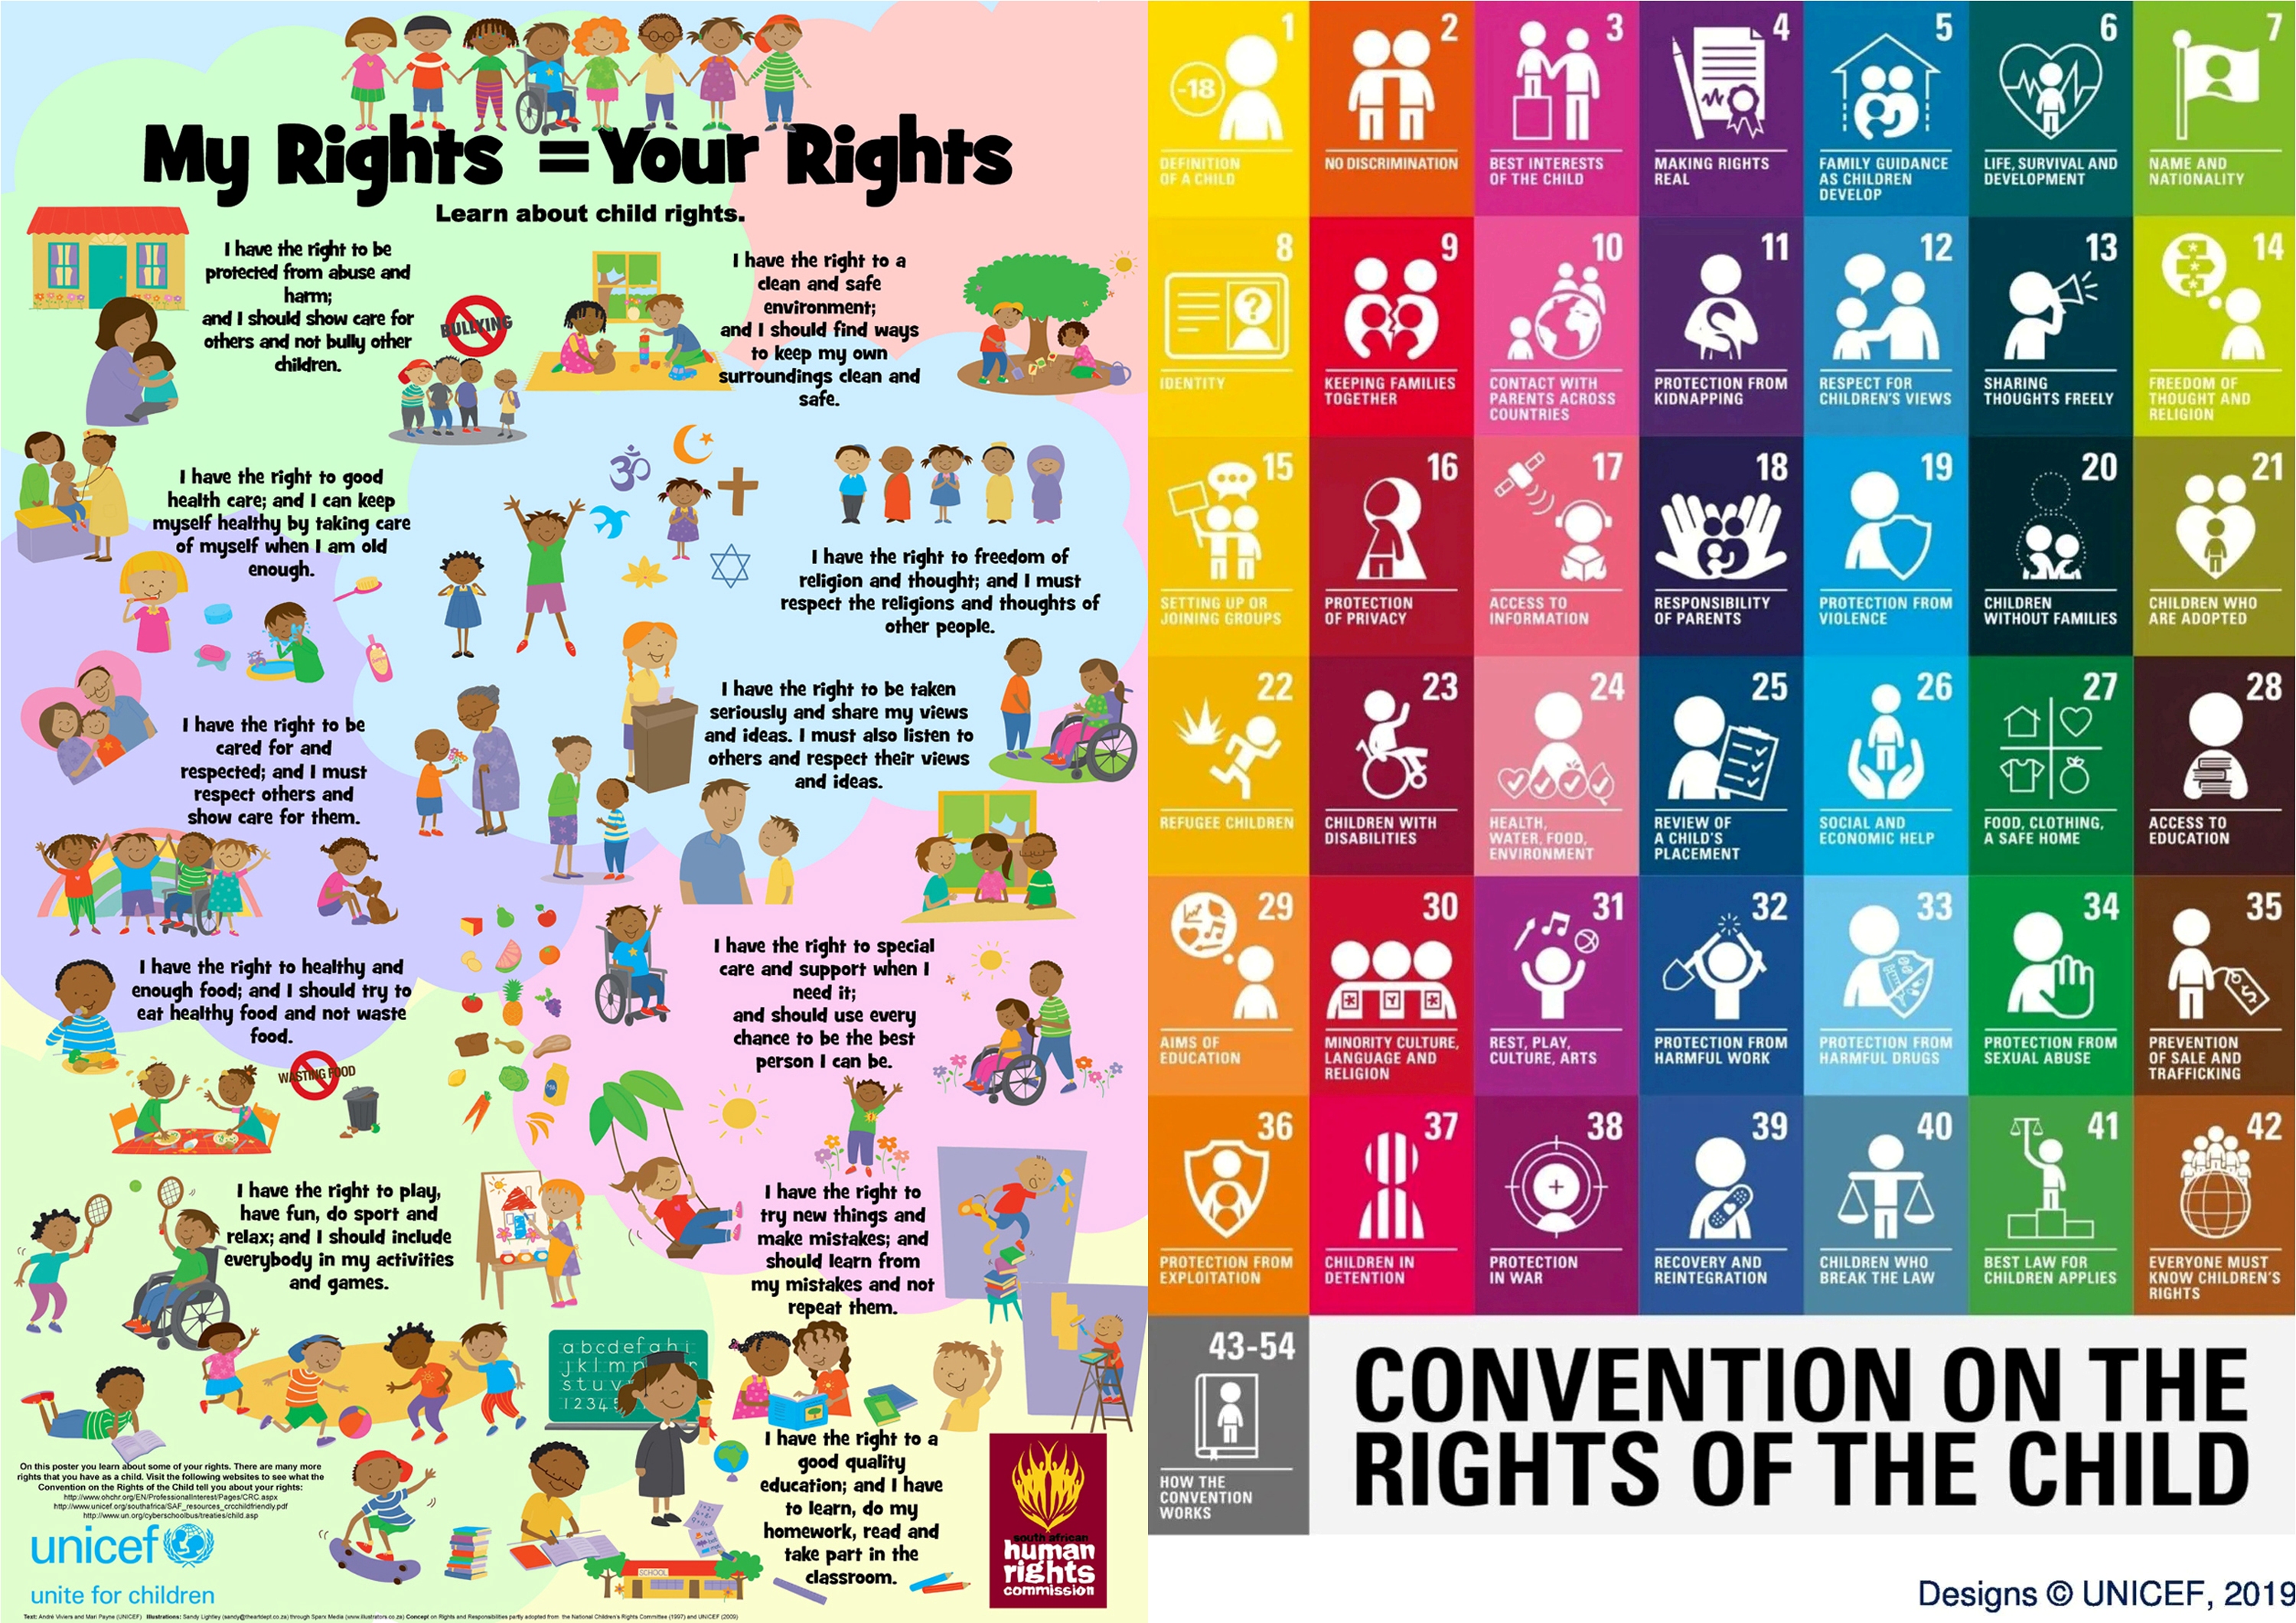 Convention on the Rights of the Child | UNICEF